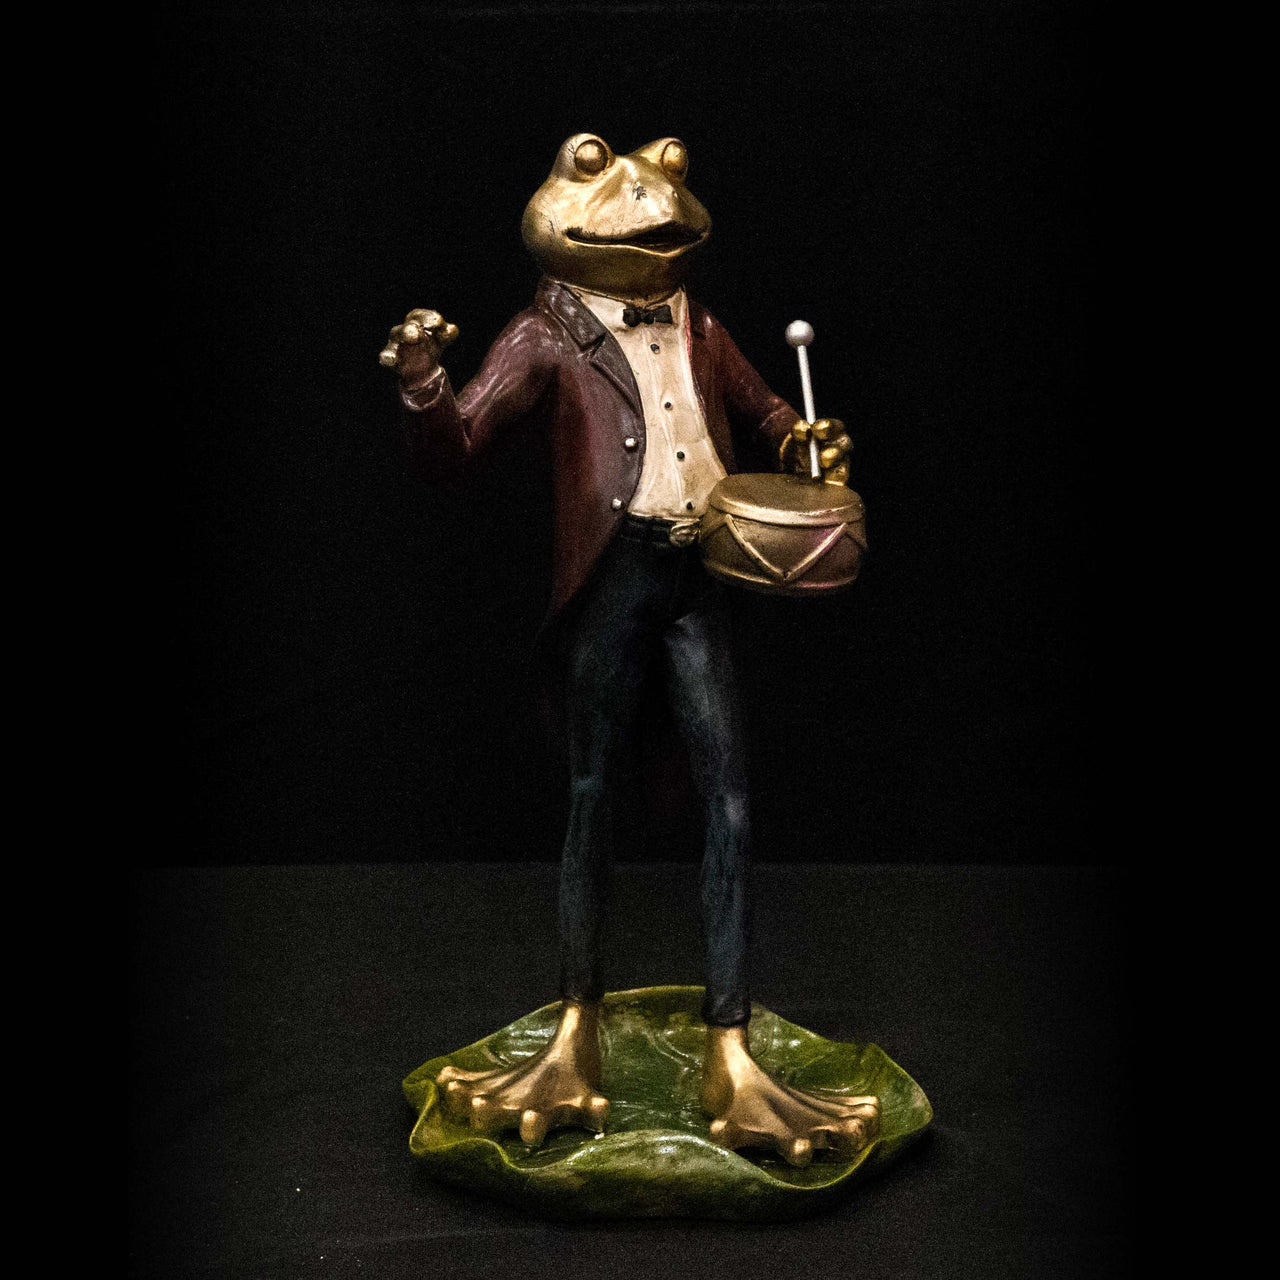 HCHD5345 - Frog Playing Snare Drum